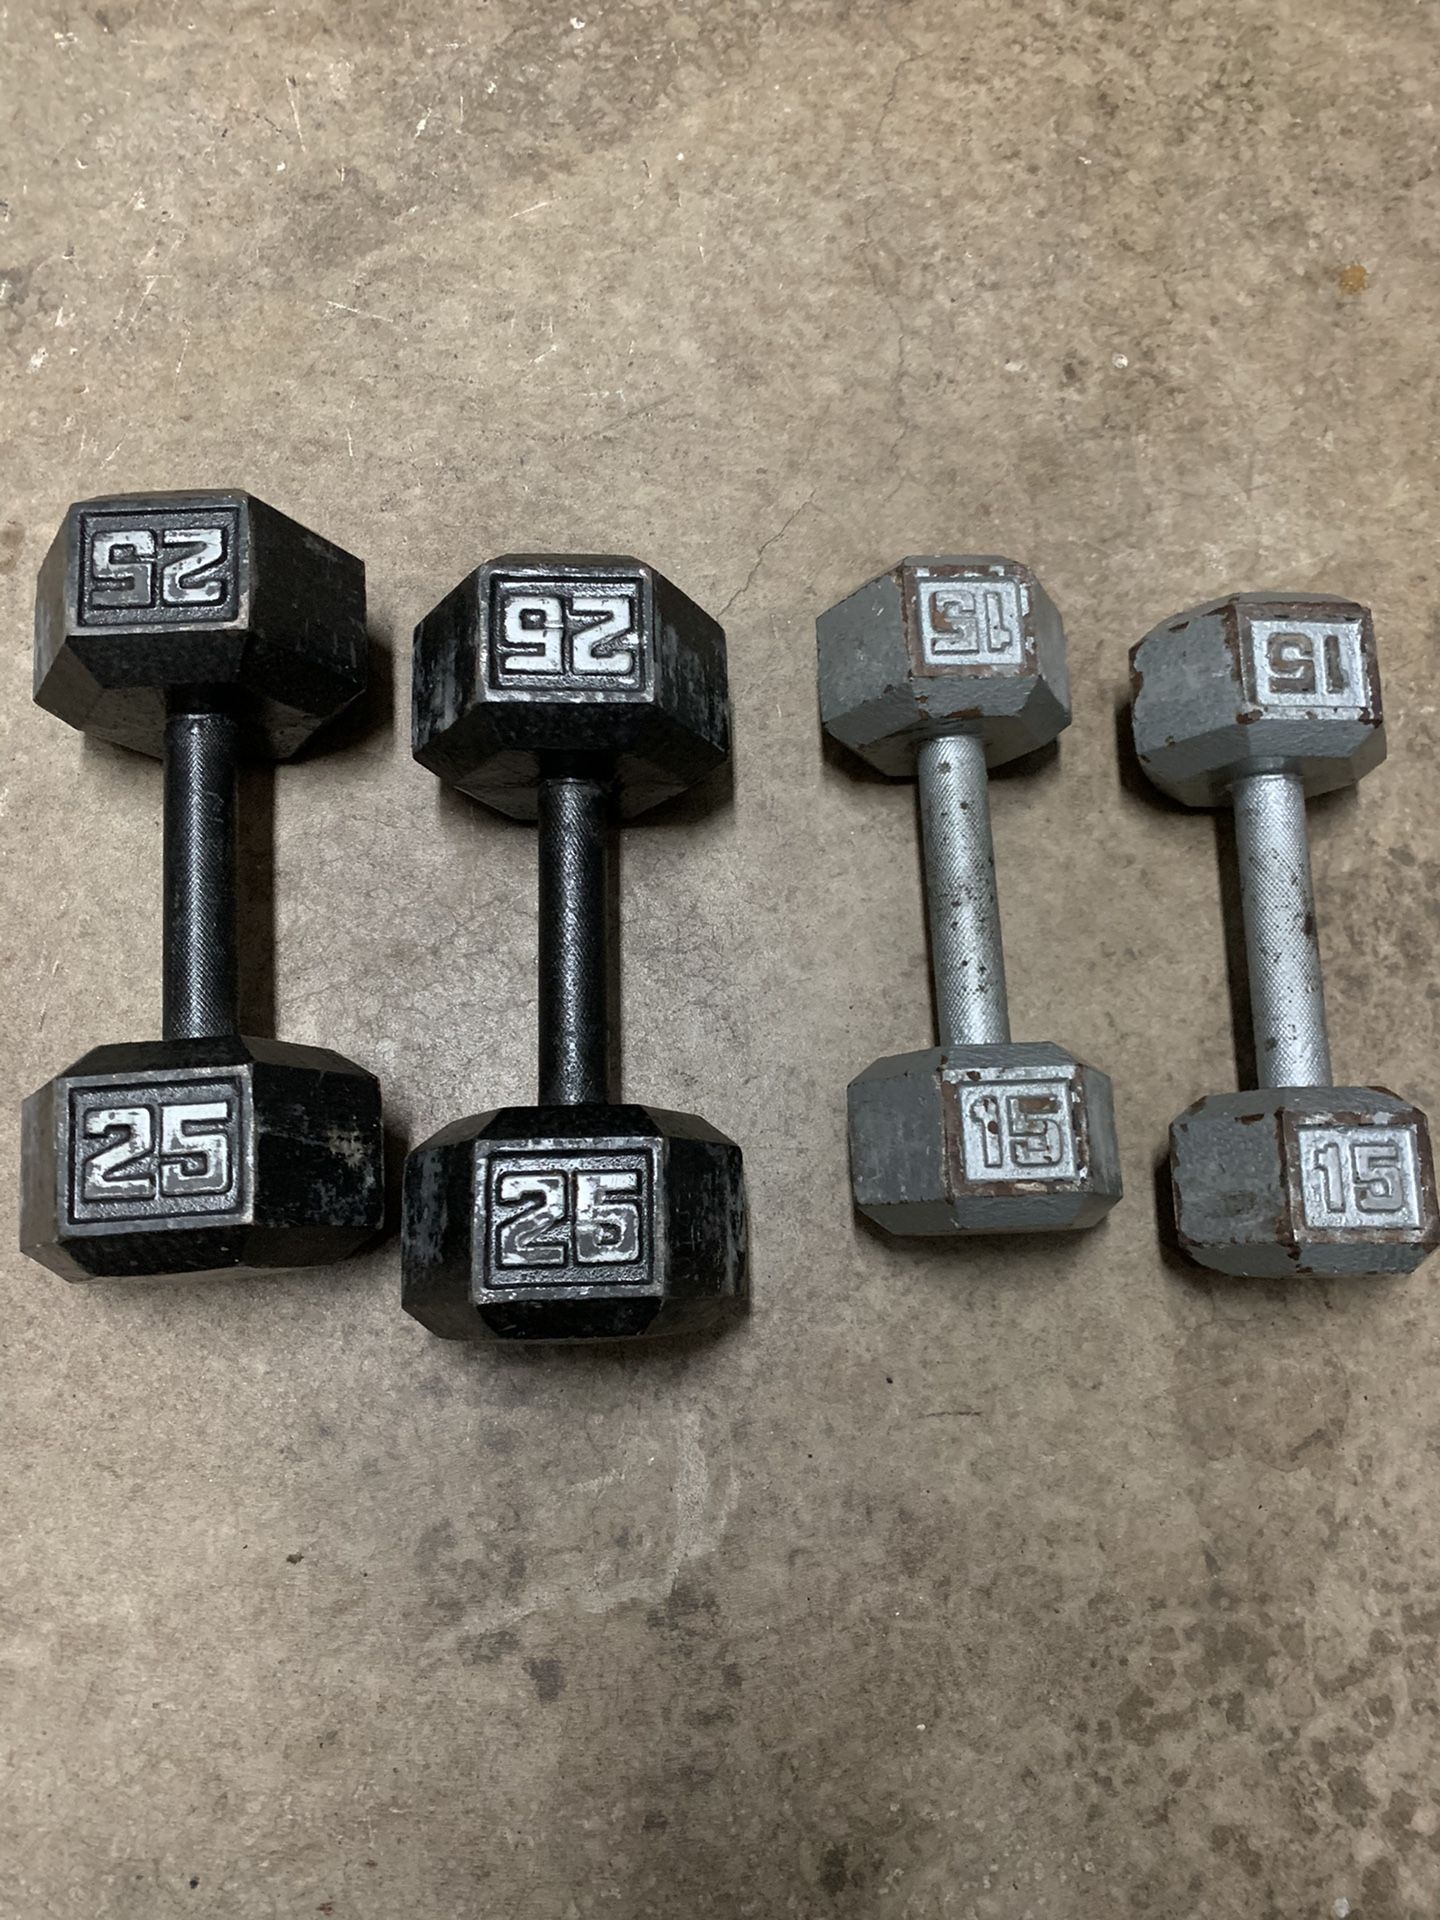 2 Dumbbell Sets (25 and 15)